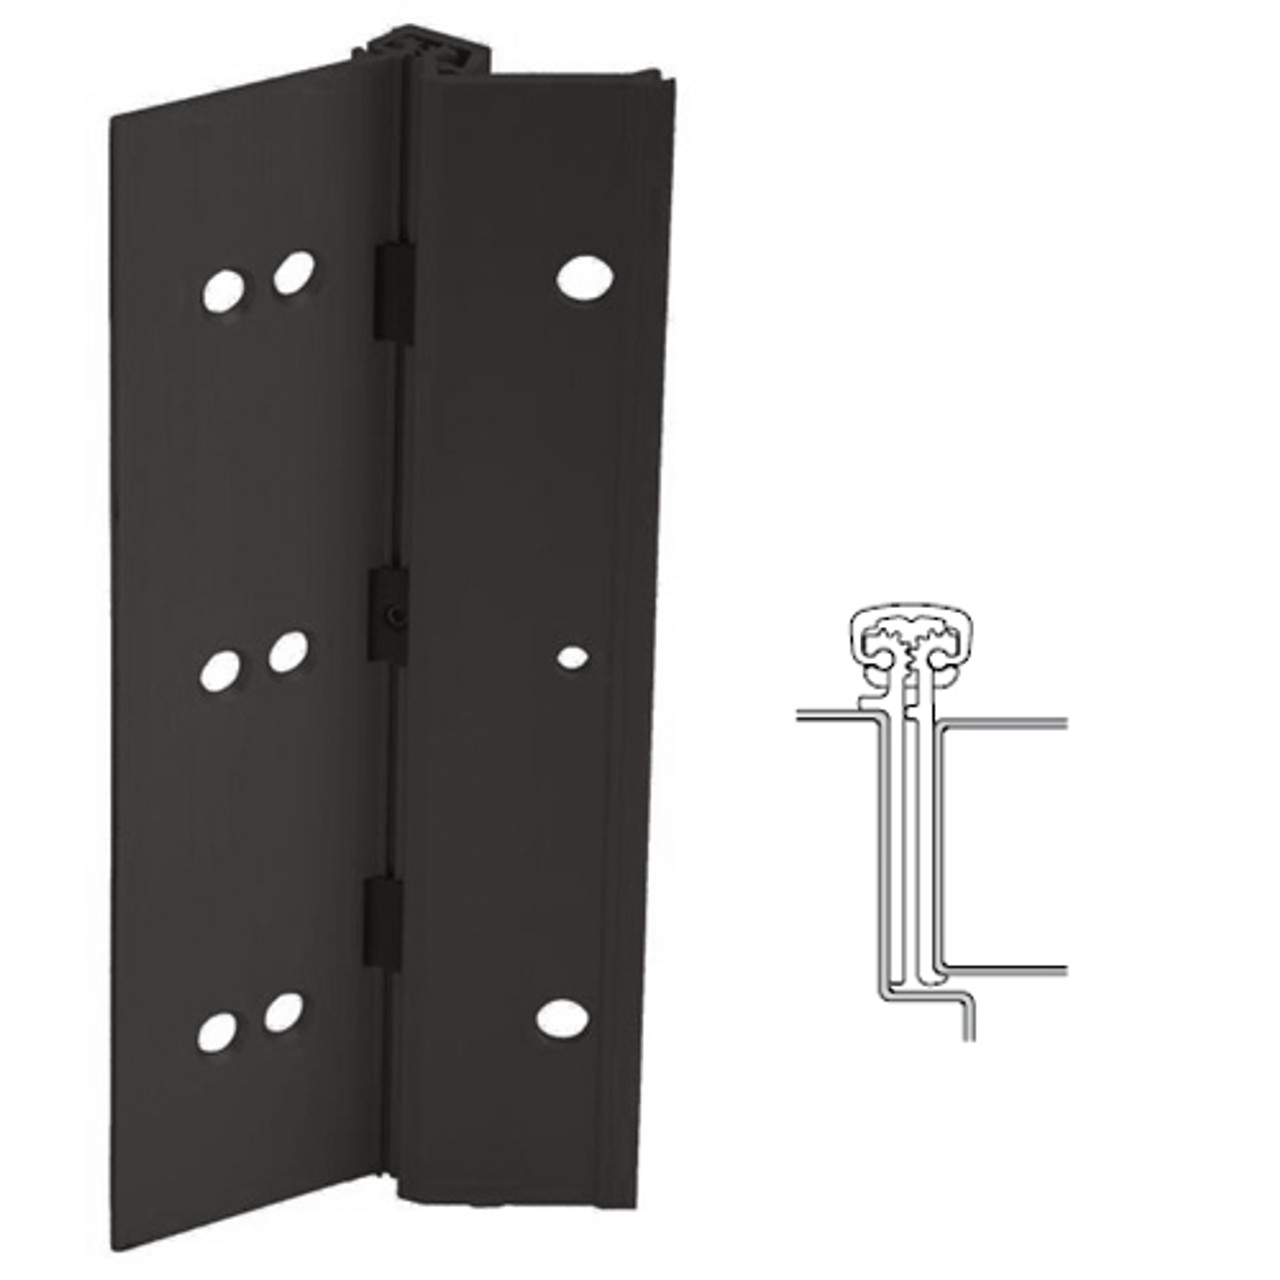 224XY-315AN-83-SECWDWD IVES Adjustable Full Surface Continuous Geared Hinges with Security Screws - Hex Pin Drive in Anodized Black